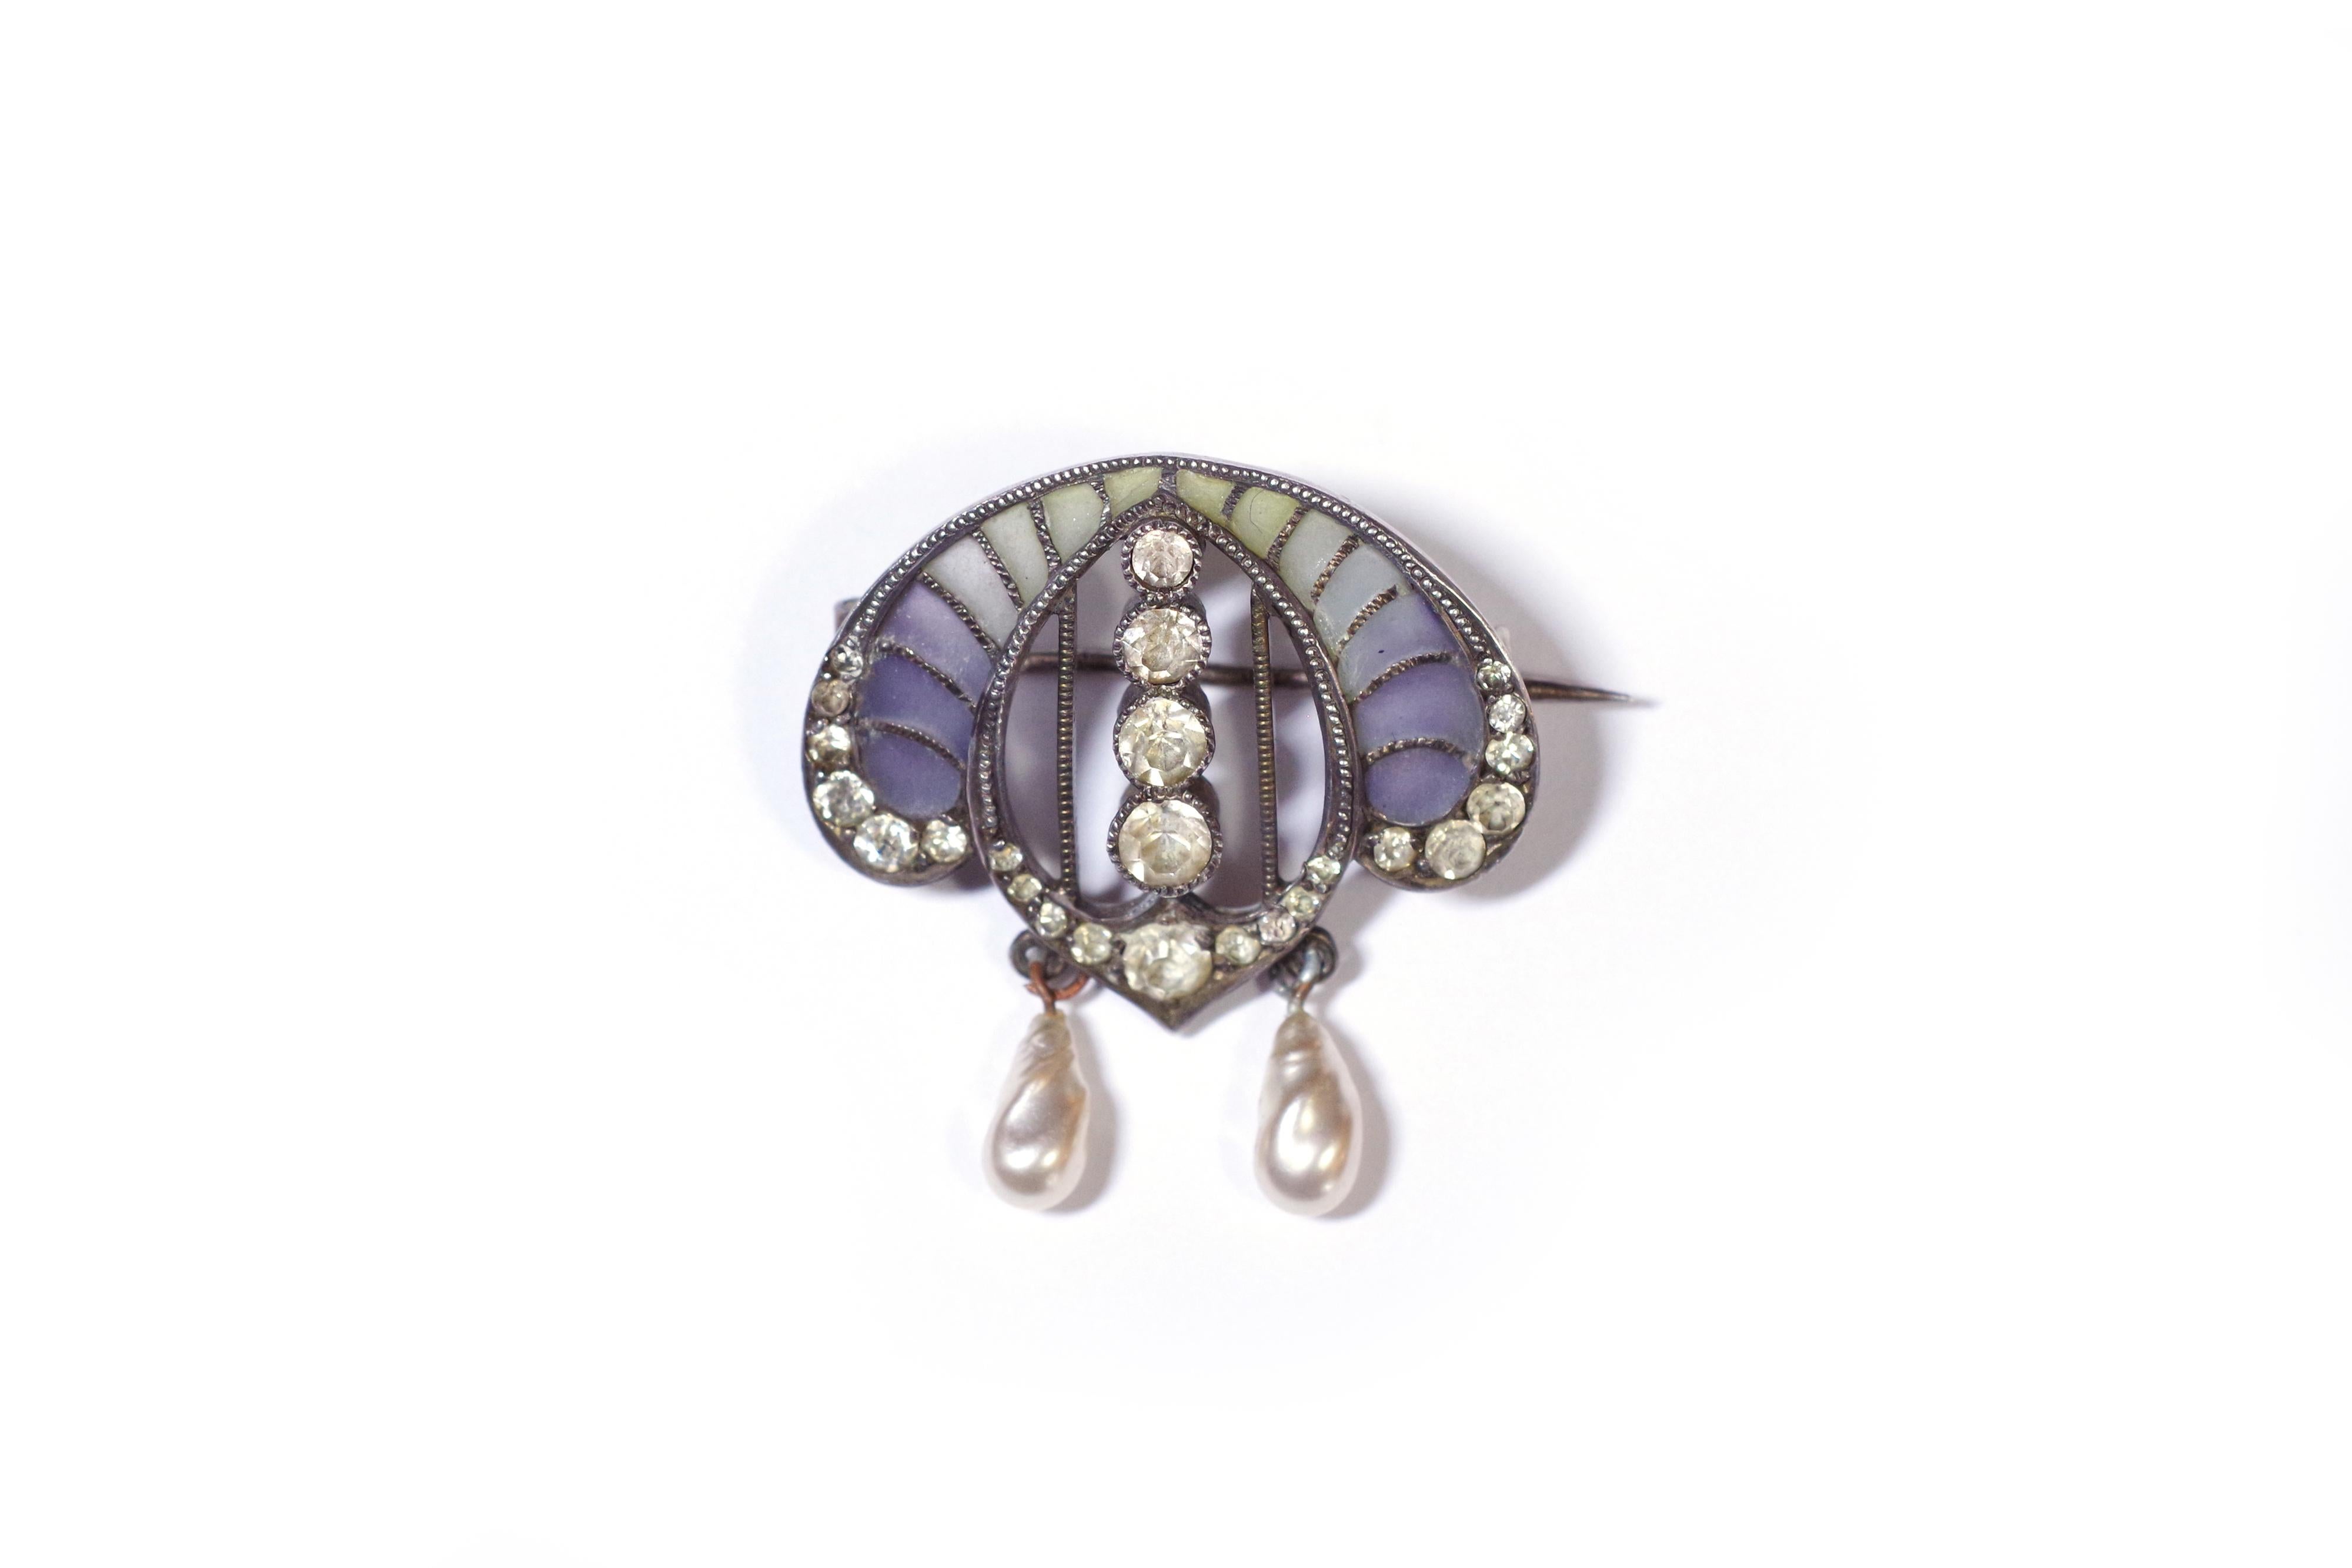 Art Nouveau enamel brooch in silver in the form of an arc of circle. The brooch is set with paste stones and decorated with matte plique-à-jour enamel ranging from green to purple. Two imitation pearls are suspended below the brooch. Jugendstil